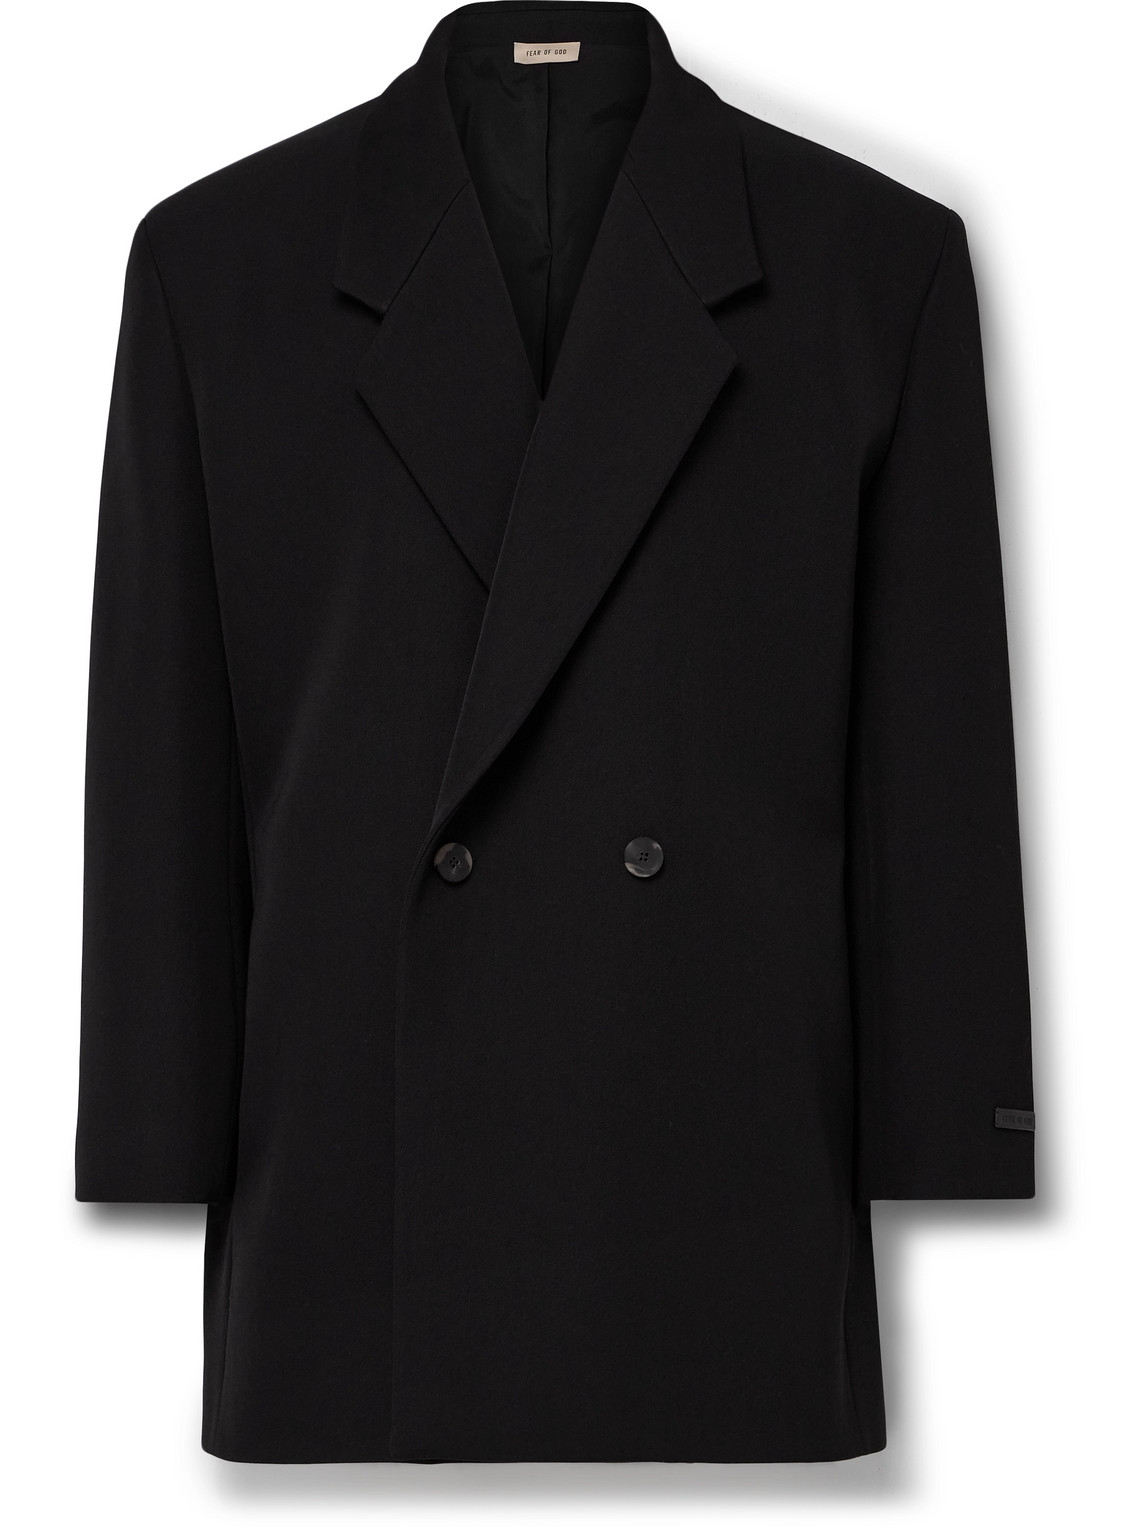 Eternal California Oversized Double-Breasted Virgin Wool and Cotton-Blend Twill Blazer